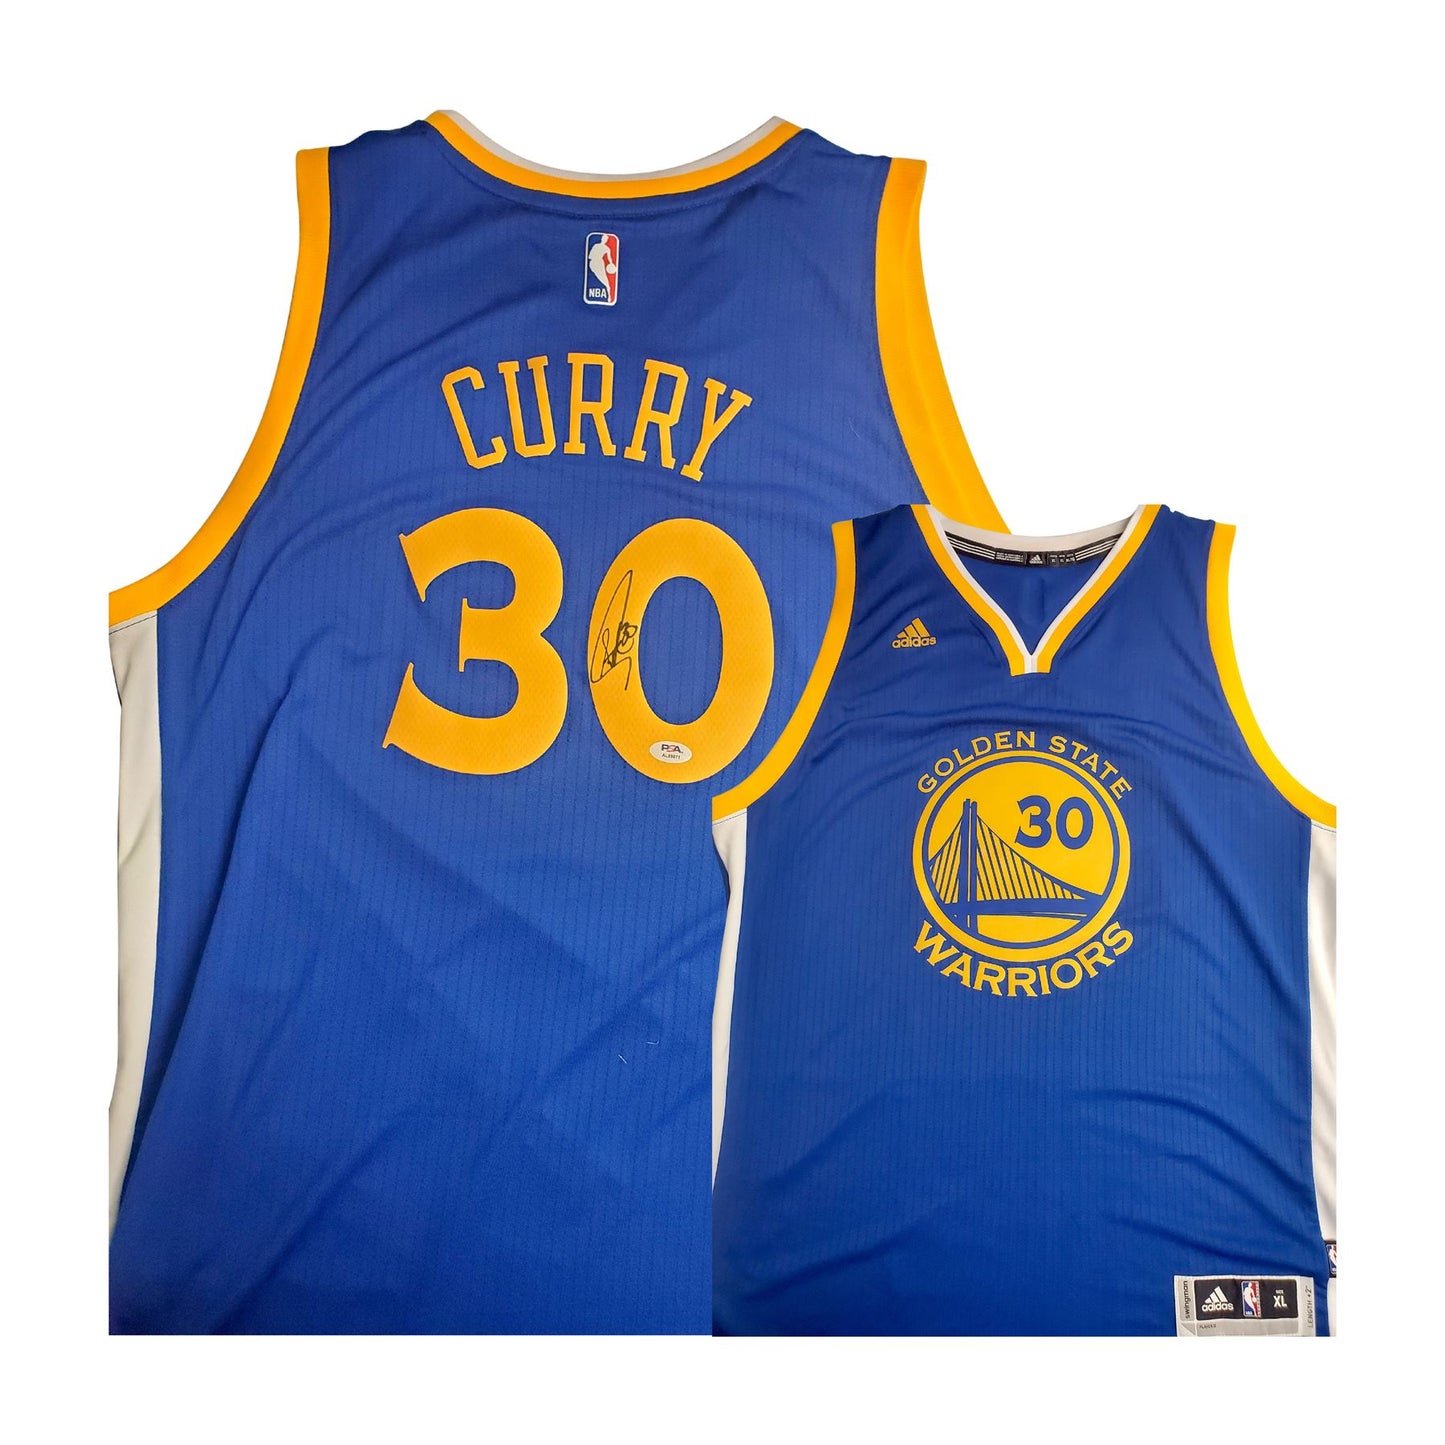 Steph Curry signed Golden State Warriors Jersey-PSA